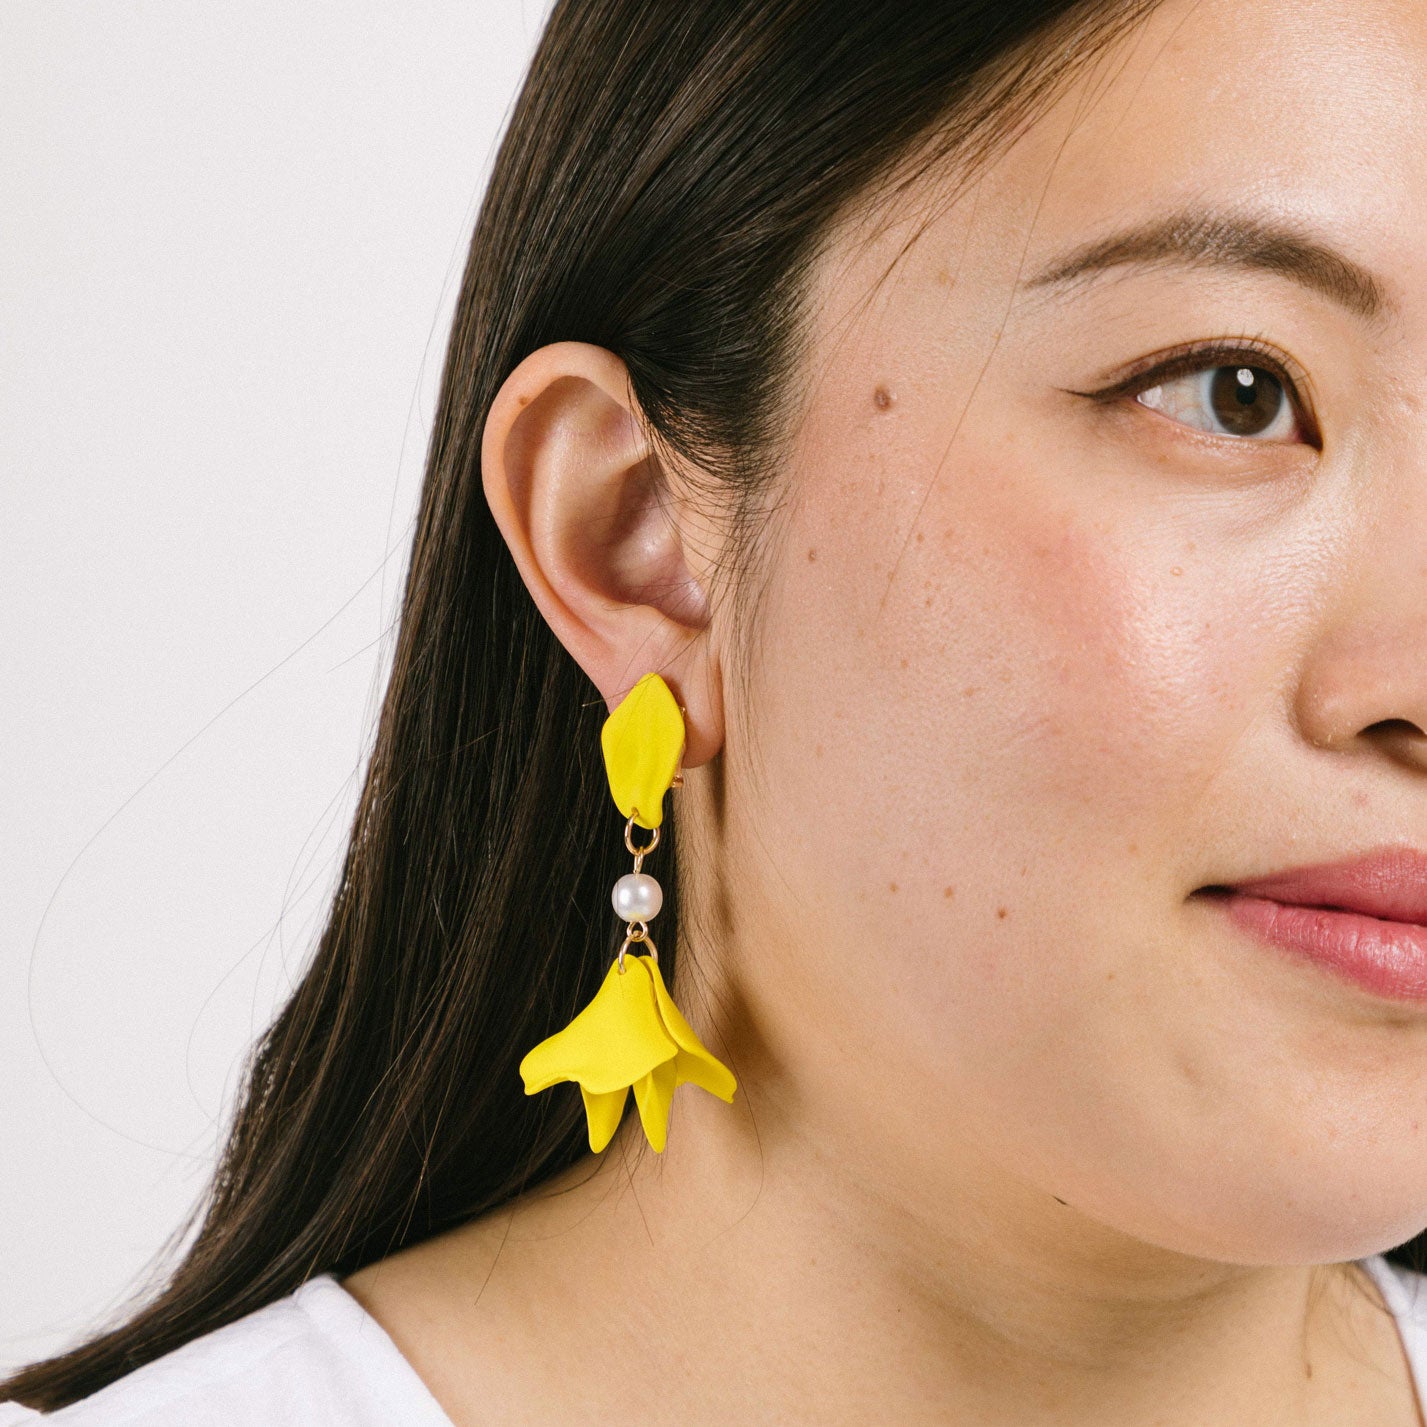 A model wearing the Metallic Petal Clip On Earrings feature a secure, padded clip-on closure for comfortable wear. Suitable for all ear types, they hold strong for up to 12 hours and have a simulated pearl finish. Each order comes with one pair. Materials include acrylic and simulated pearl. Clips feature removable rubber padding.